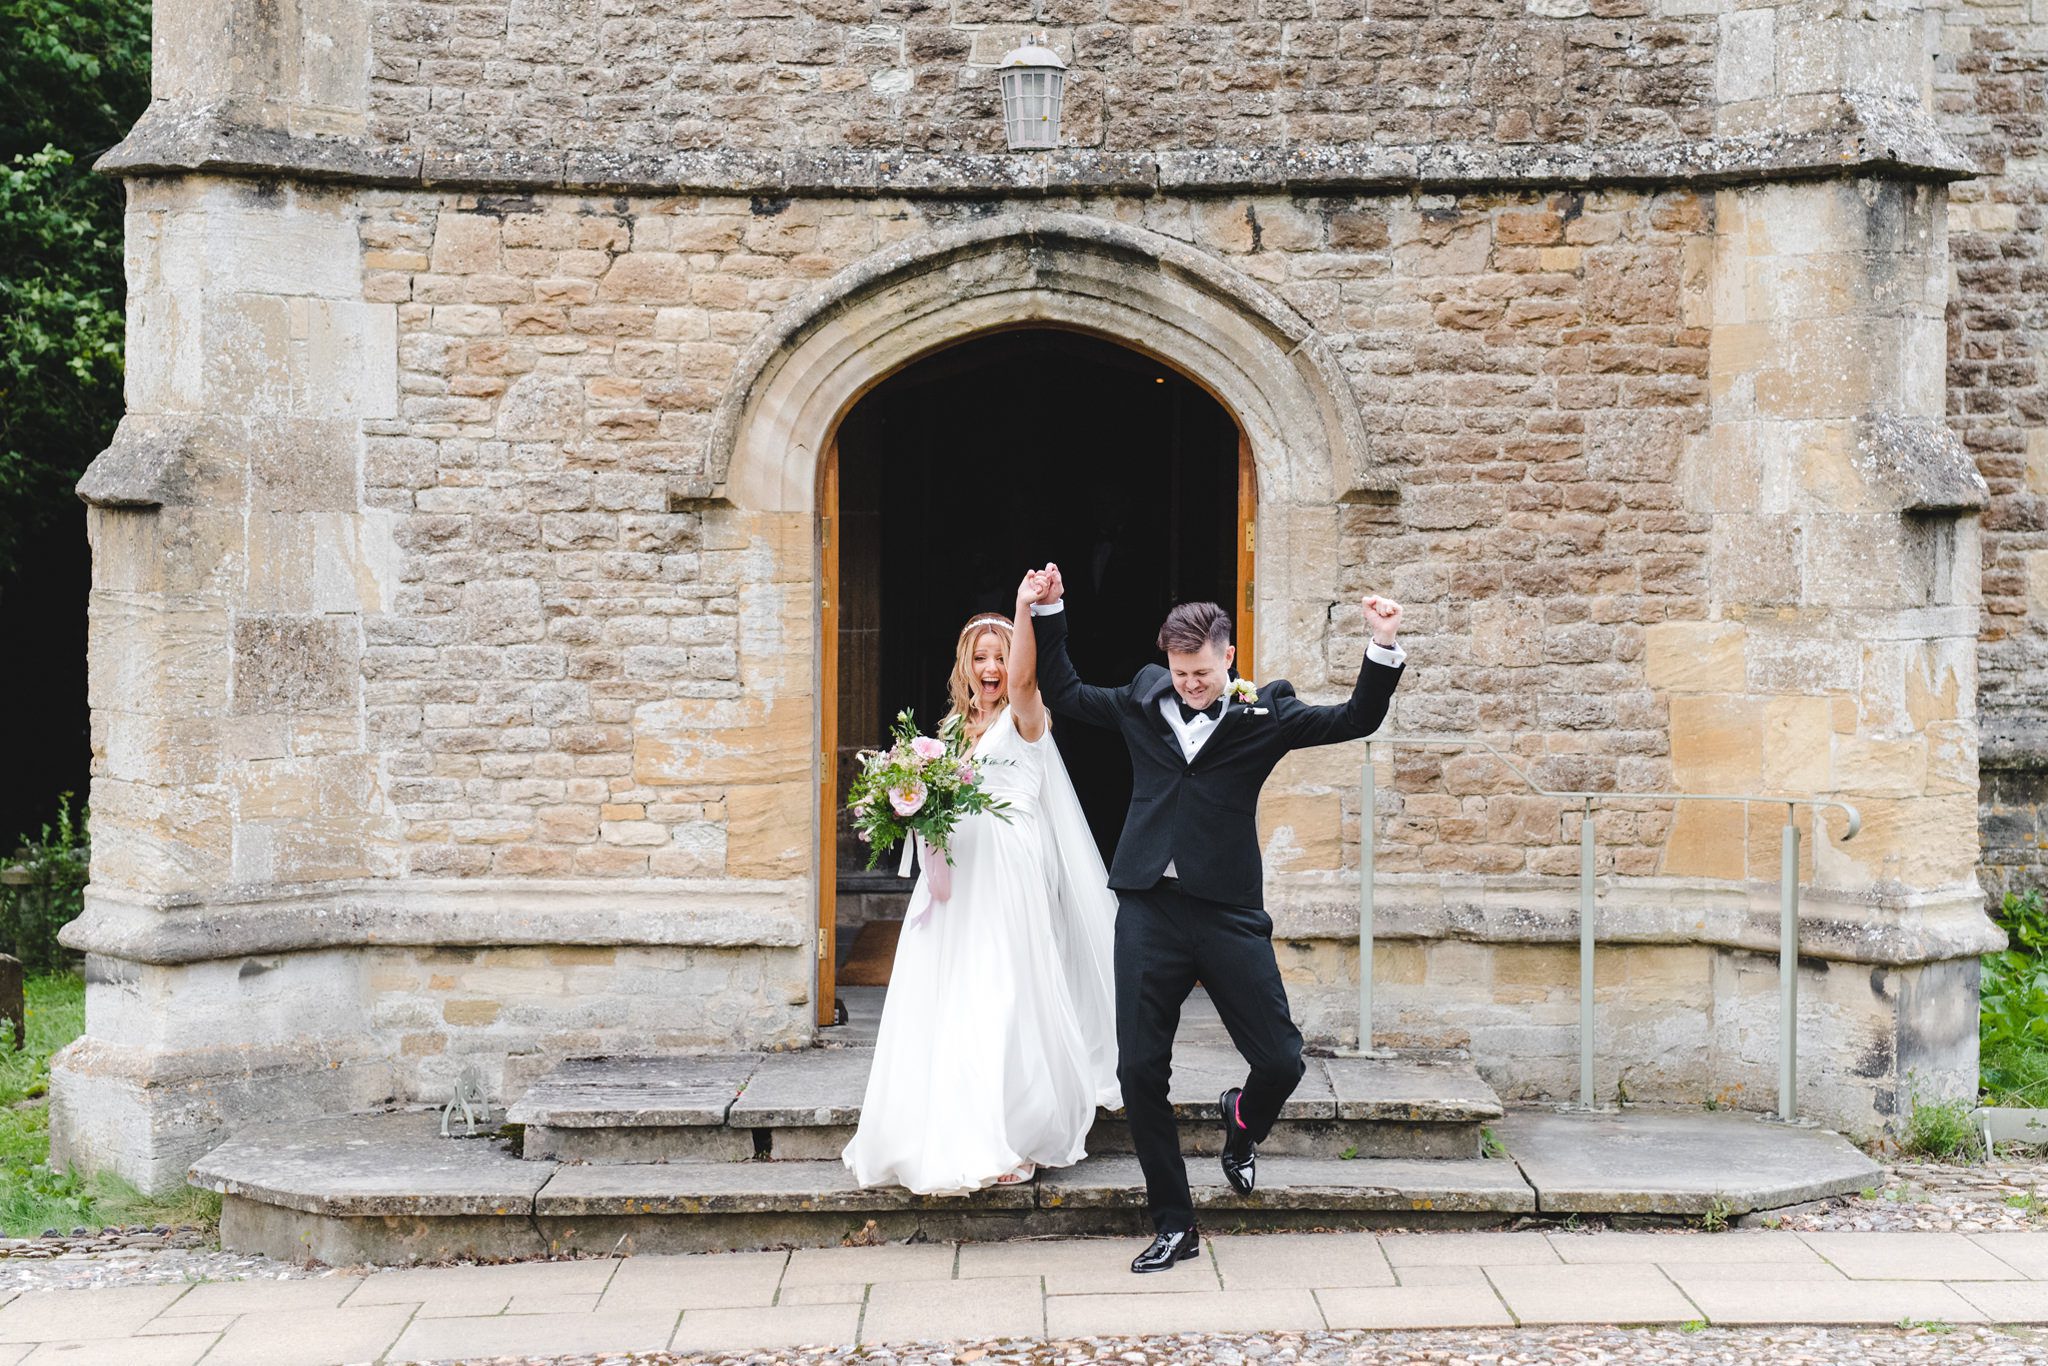 Bride and groom exiting the church with their arms in the air